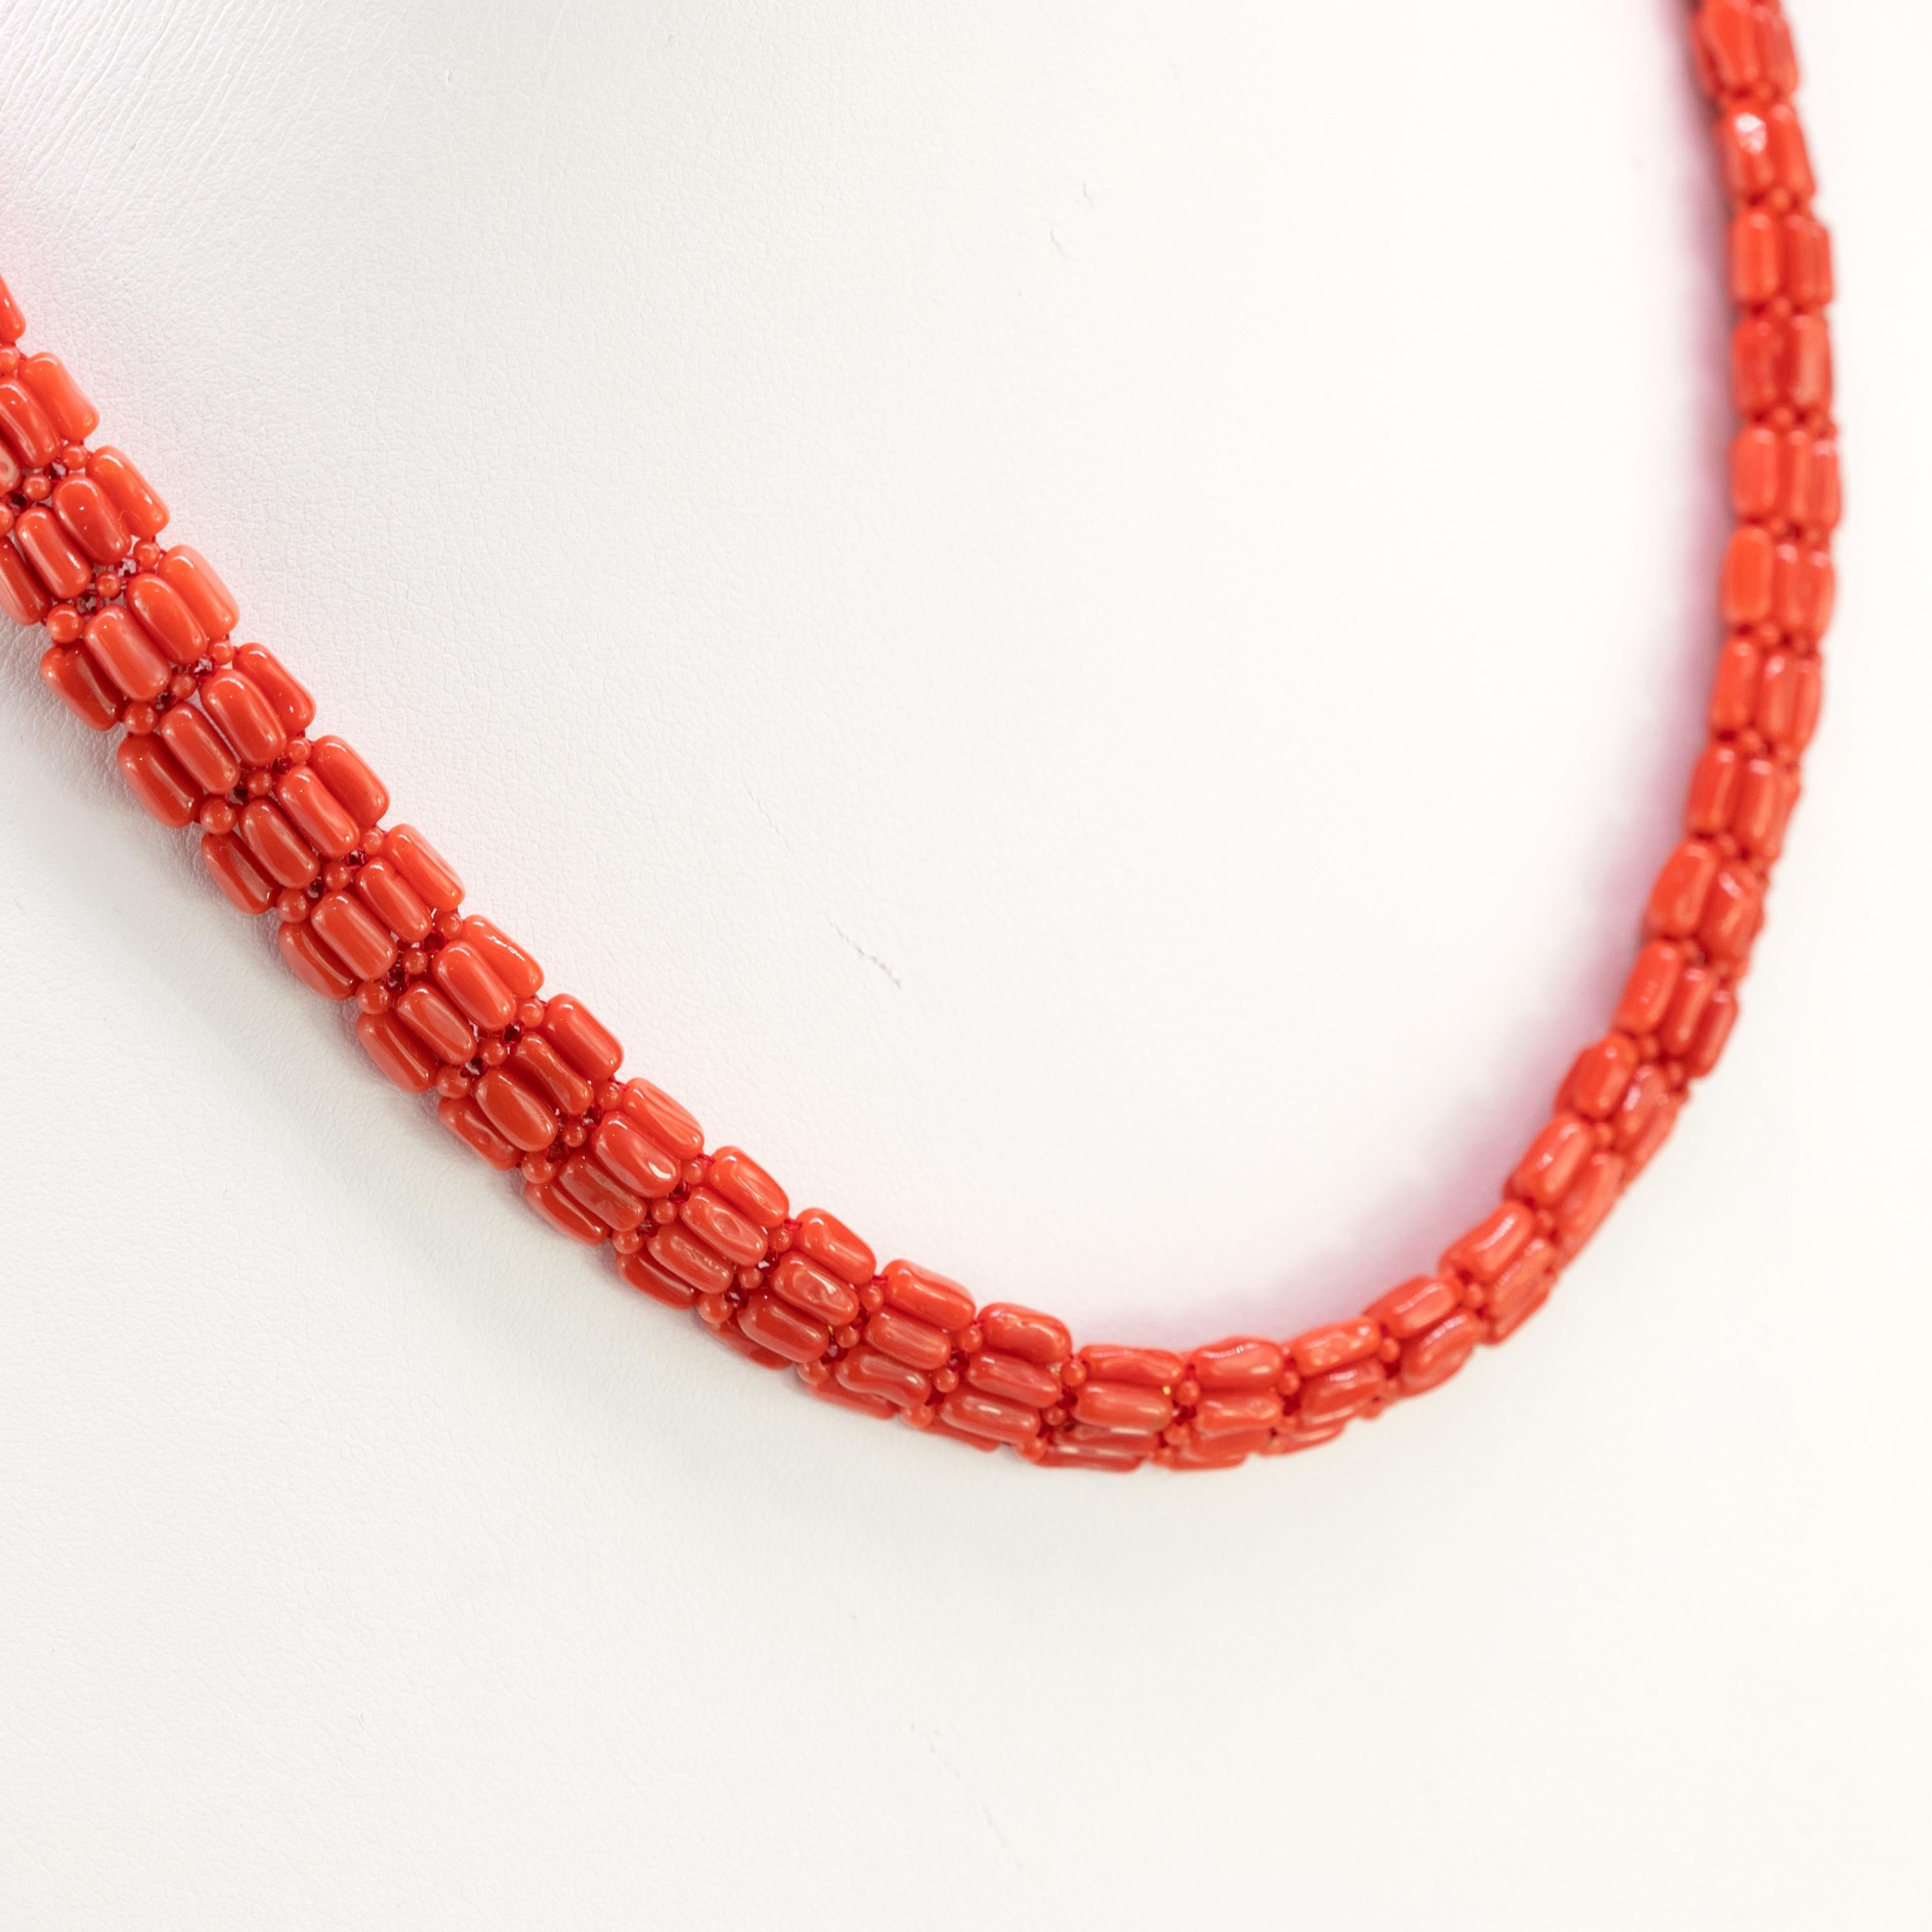 This classy and fashionable red coral princess necklace is inspired in a soft look. For a simple and elegant woman not afraid of color and uniqueness. With a touch of modernity and natural bright through the coral woven that interlocks tube and